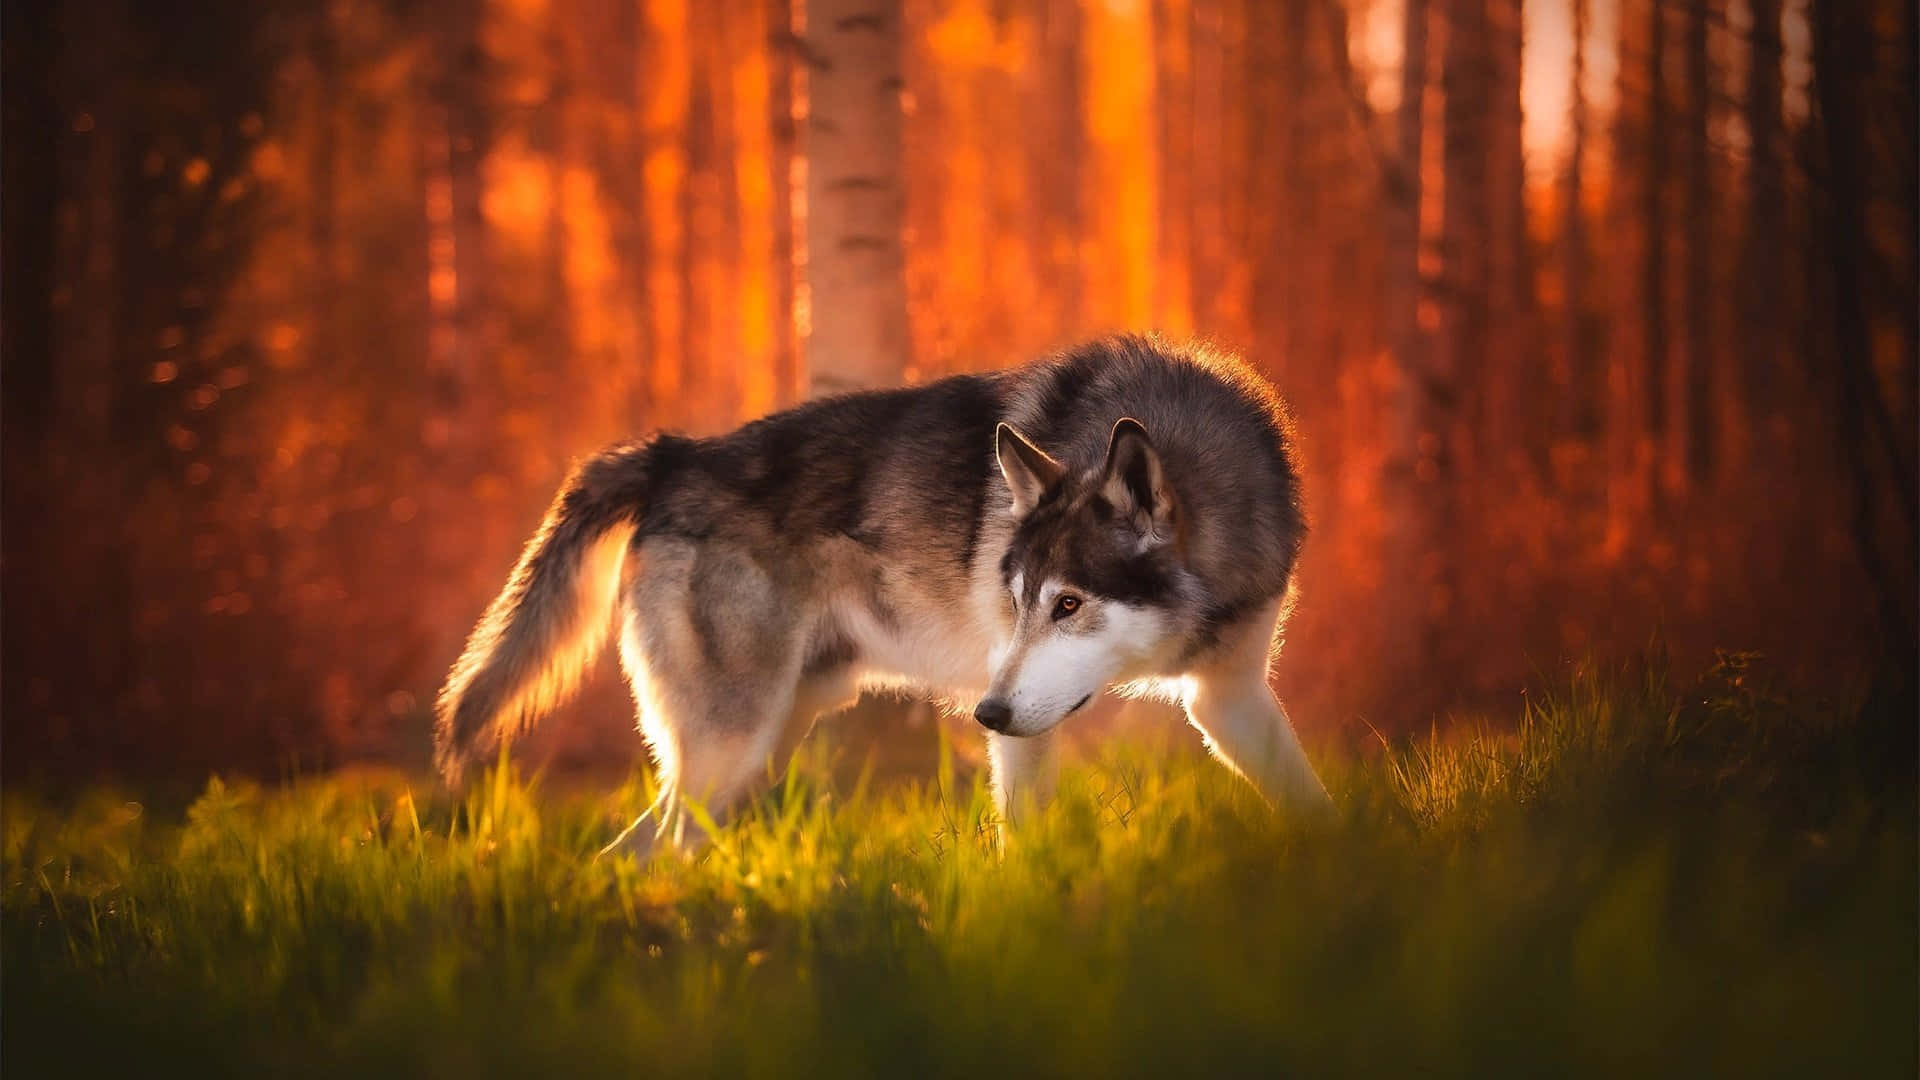 Majestic Wolf in Vibrant Autumn Forest Wallpaper